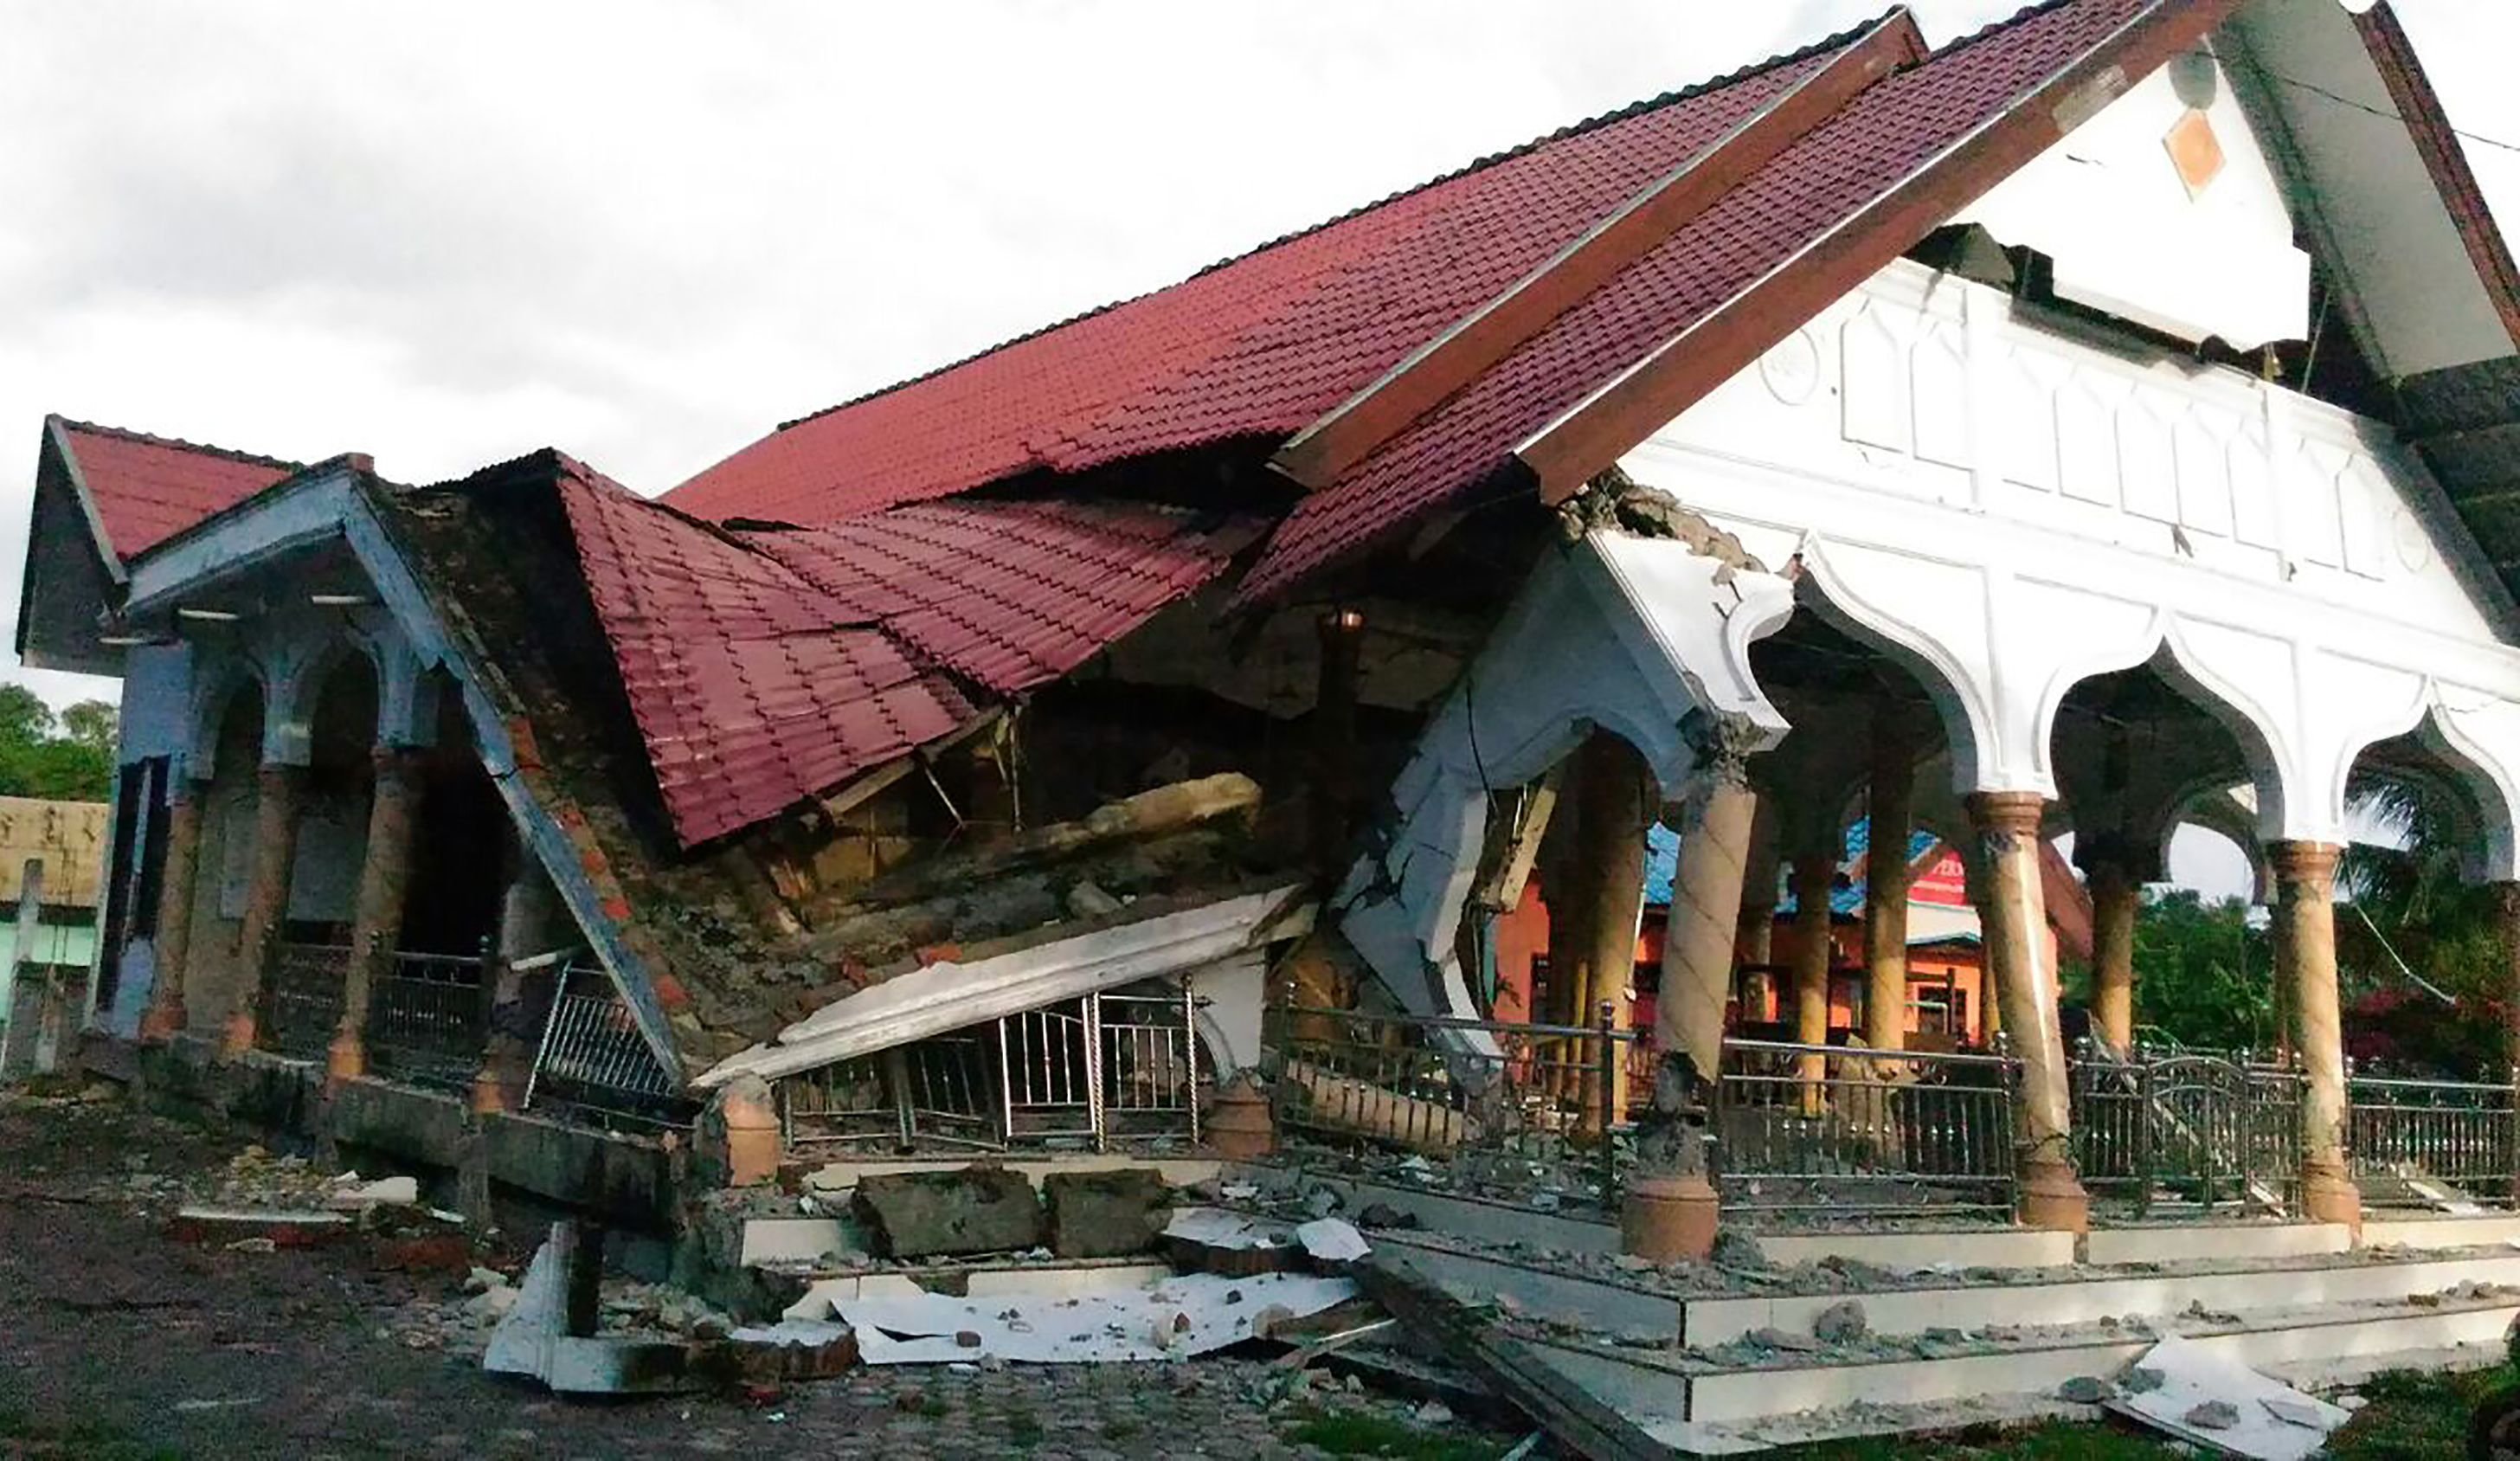 A badly damaged building is seen after a 6.5-magnitude earthquake struck the town of Pidie, Indonesia's Aceh province in northern Sumatra, on December 7, 2016. One person died and dozens were feared trapped in rubble after a strong earthquake struck off Aceh province on Indonesia's Sumatra island on December 7, officials said. / AFP PHOTO / ZIAN MUTTAQIEN